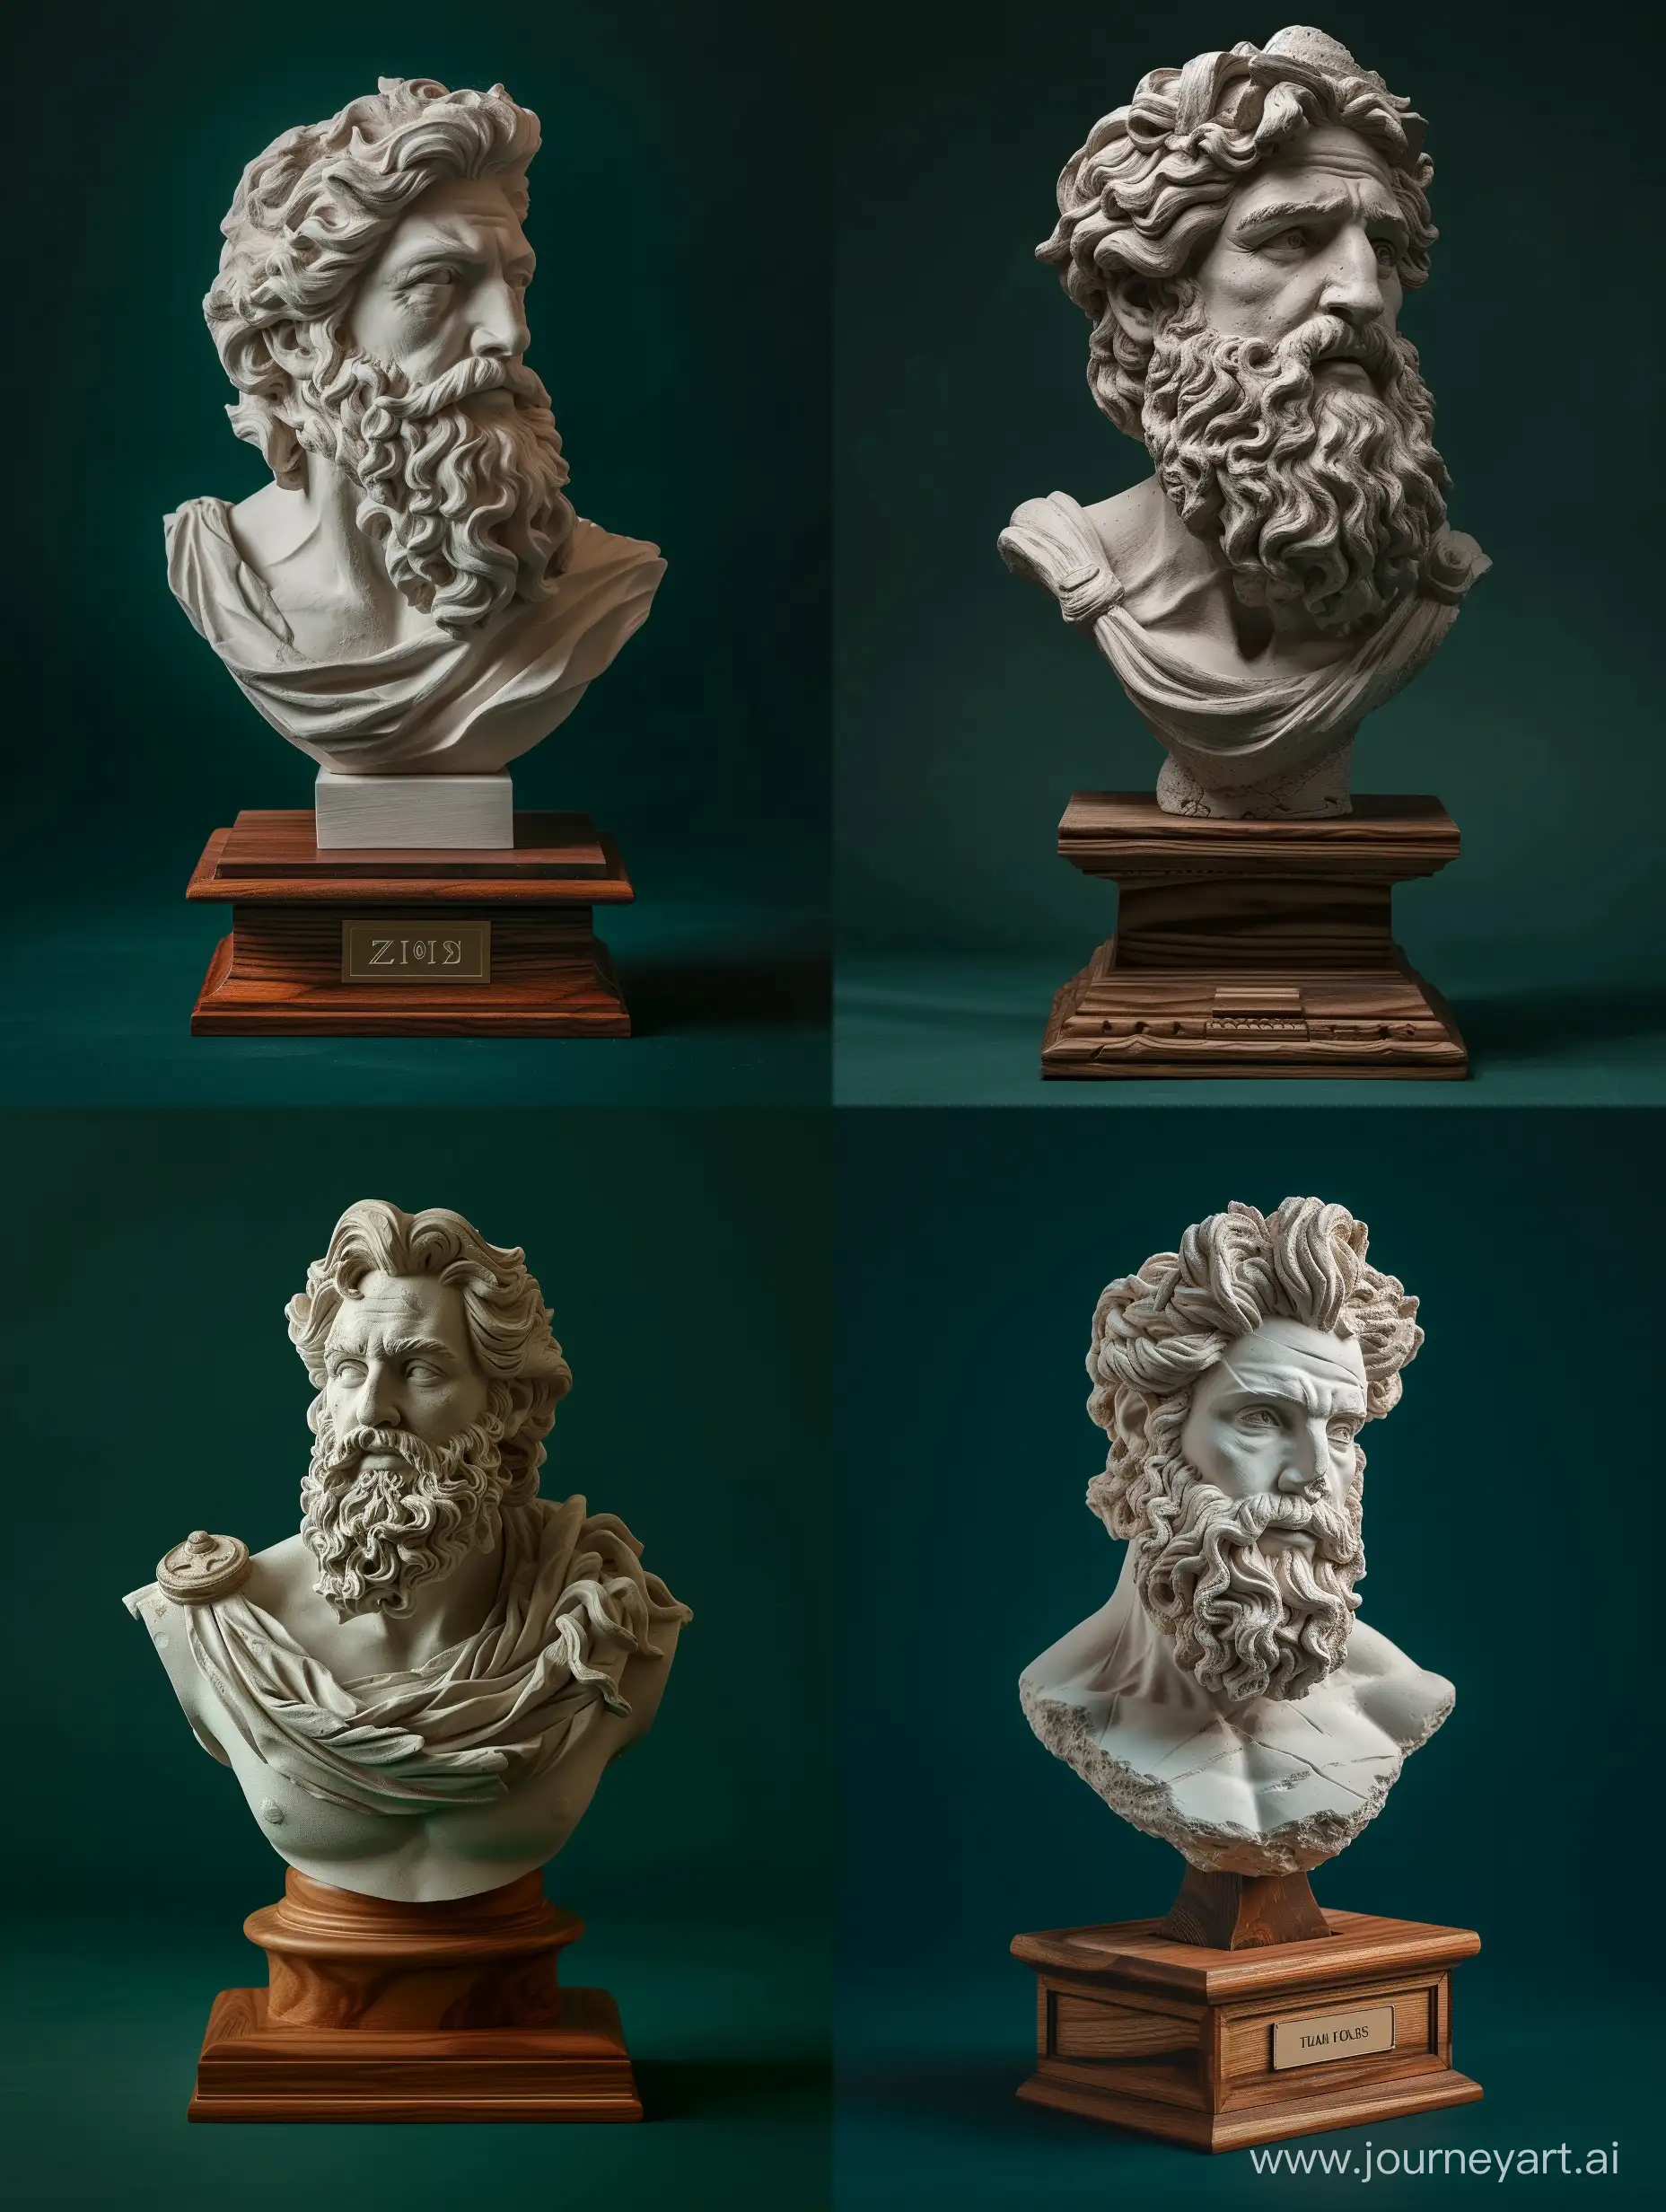 Zeus-Bust-Sculpture-on-Wooden-Base-in-Cinematic-Pose